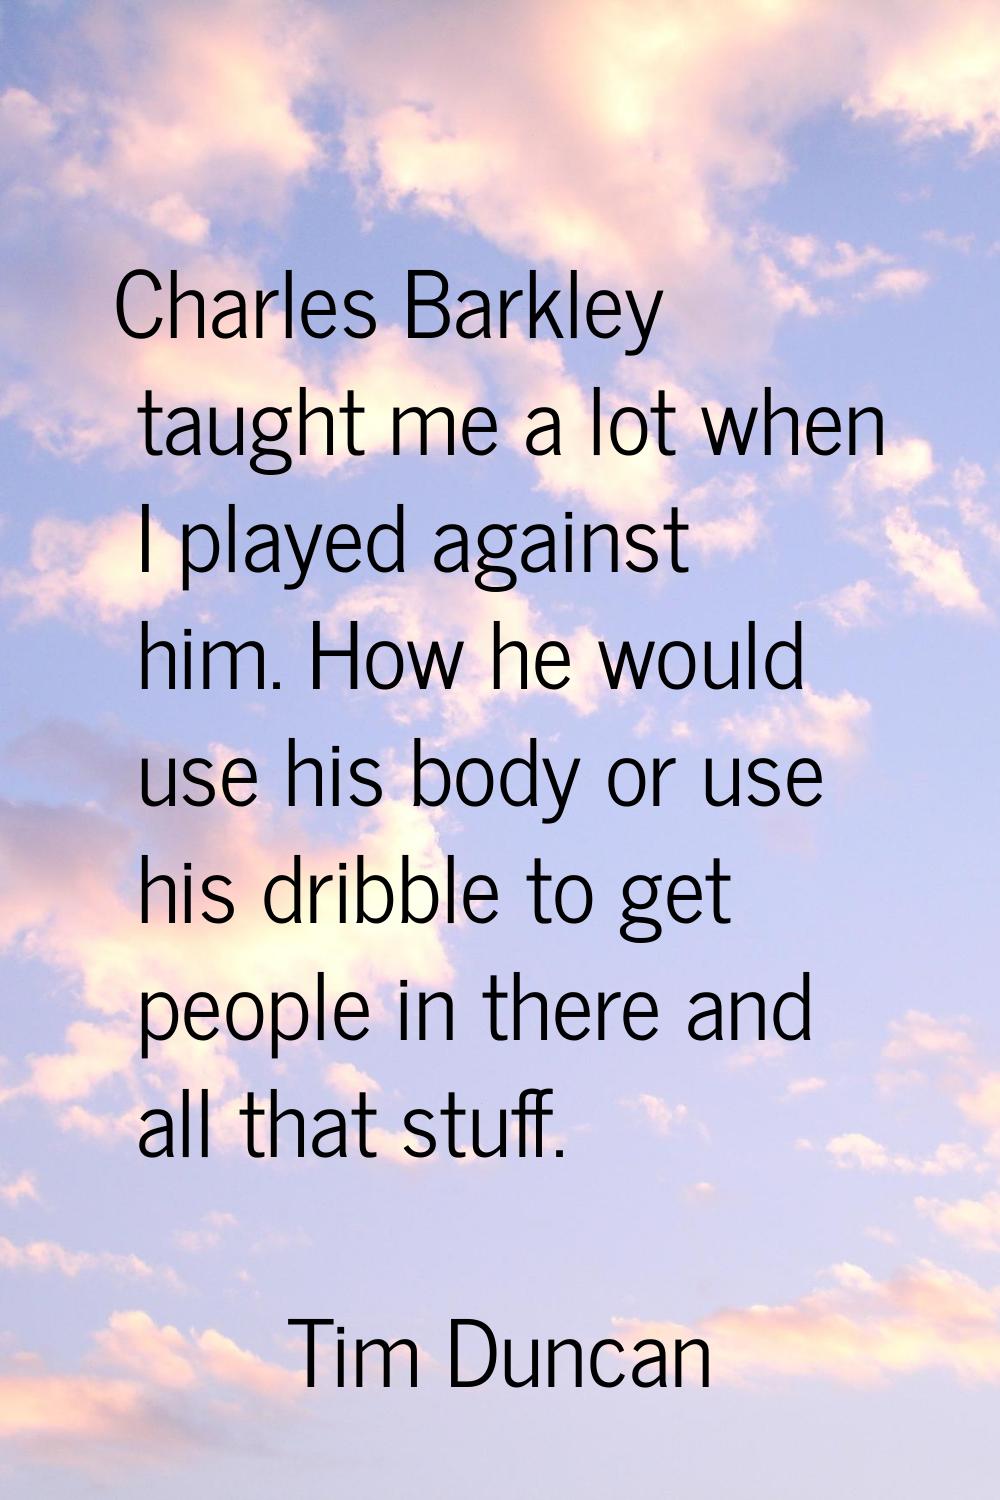 Charles Barkley taught me a lot when I played against him. How he would use his body or use his dri